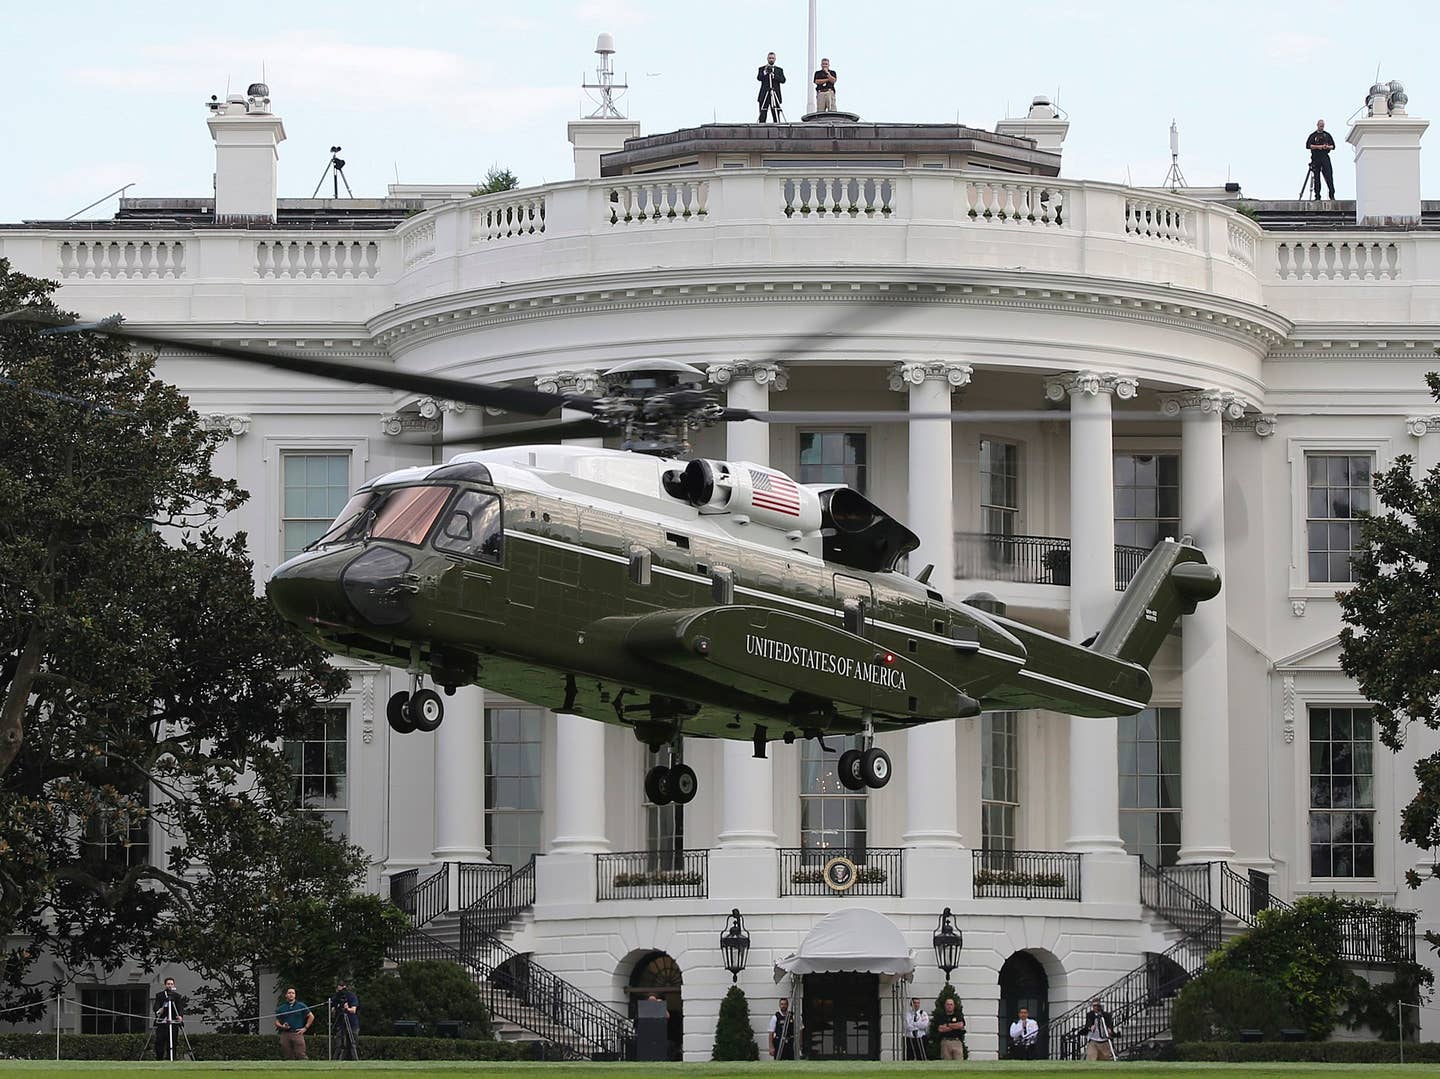 (Sept. 22, 2018) Marine Helicopter Squadron (HMX) 1 conducts test flights of the new VH-92A helicopter over the South Lawn of the White House, Sept. 22, 2018, in Washington, D.C. (U.S. Marine Corps photo by Sgt. Hunter Helis/Released)